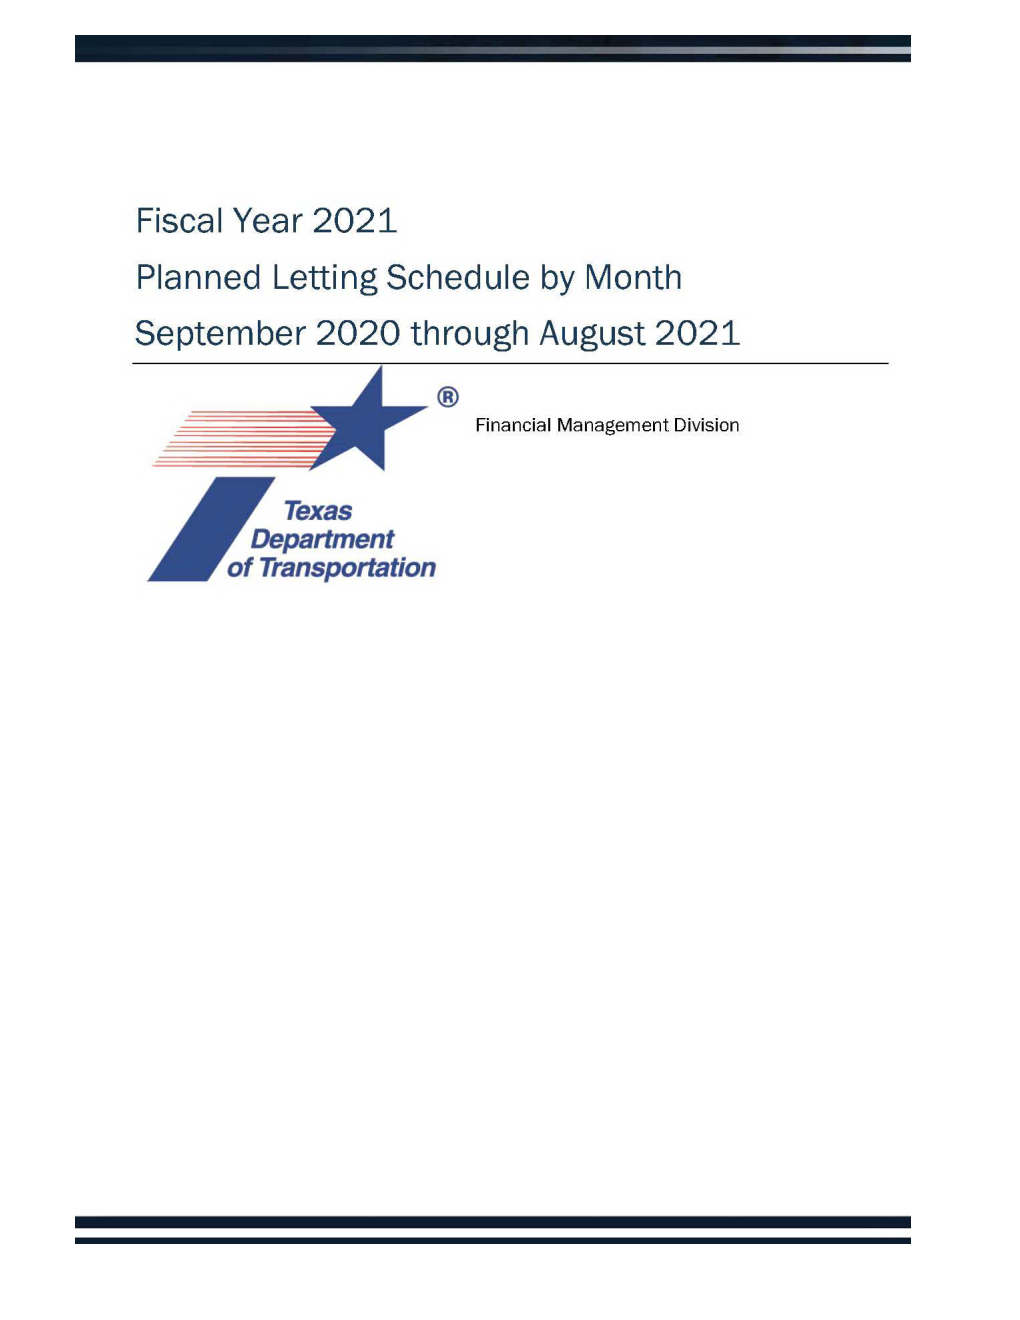 FY 2021 Planned Letting Schedule by Month